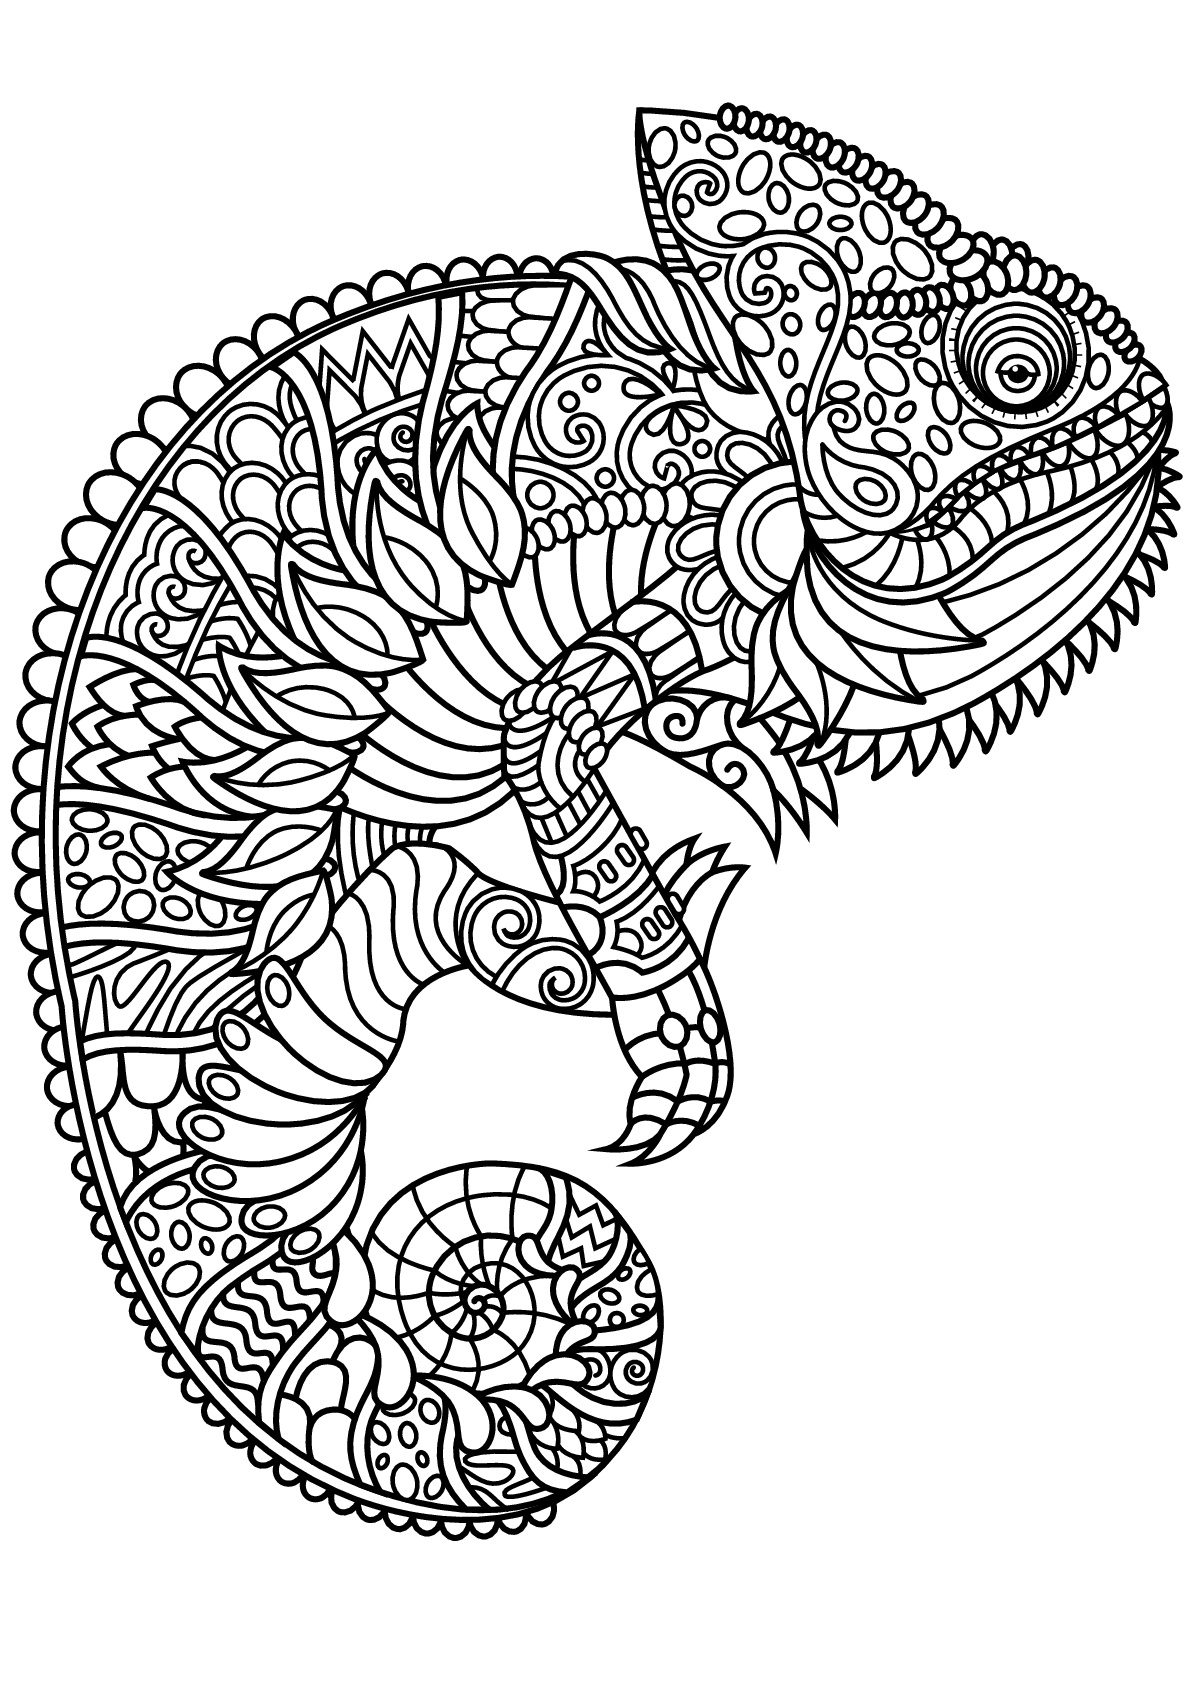 Chameleon surrounded by paisley designs